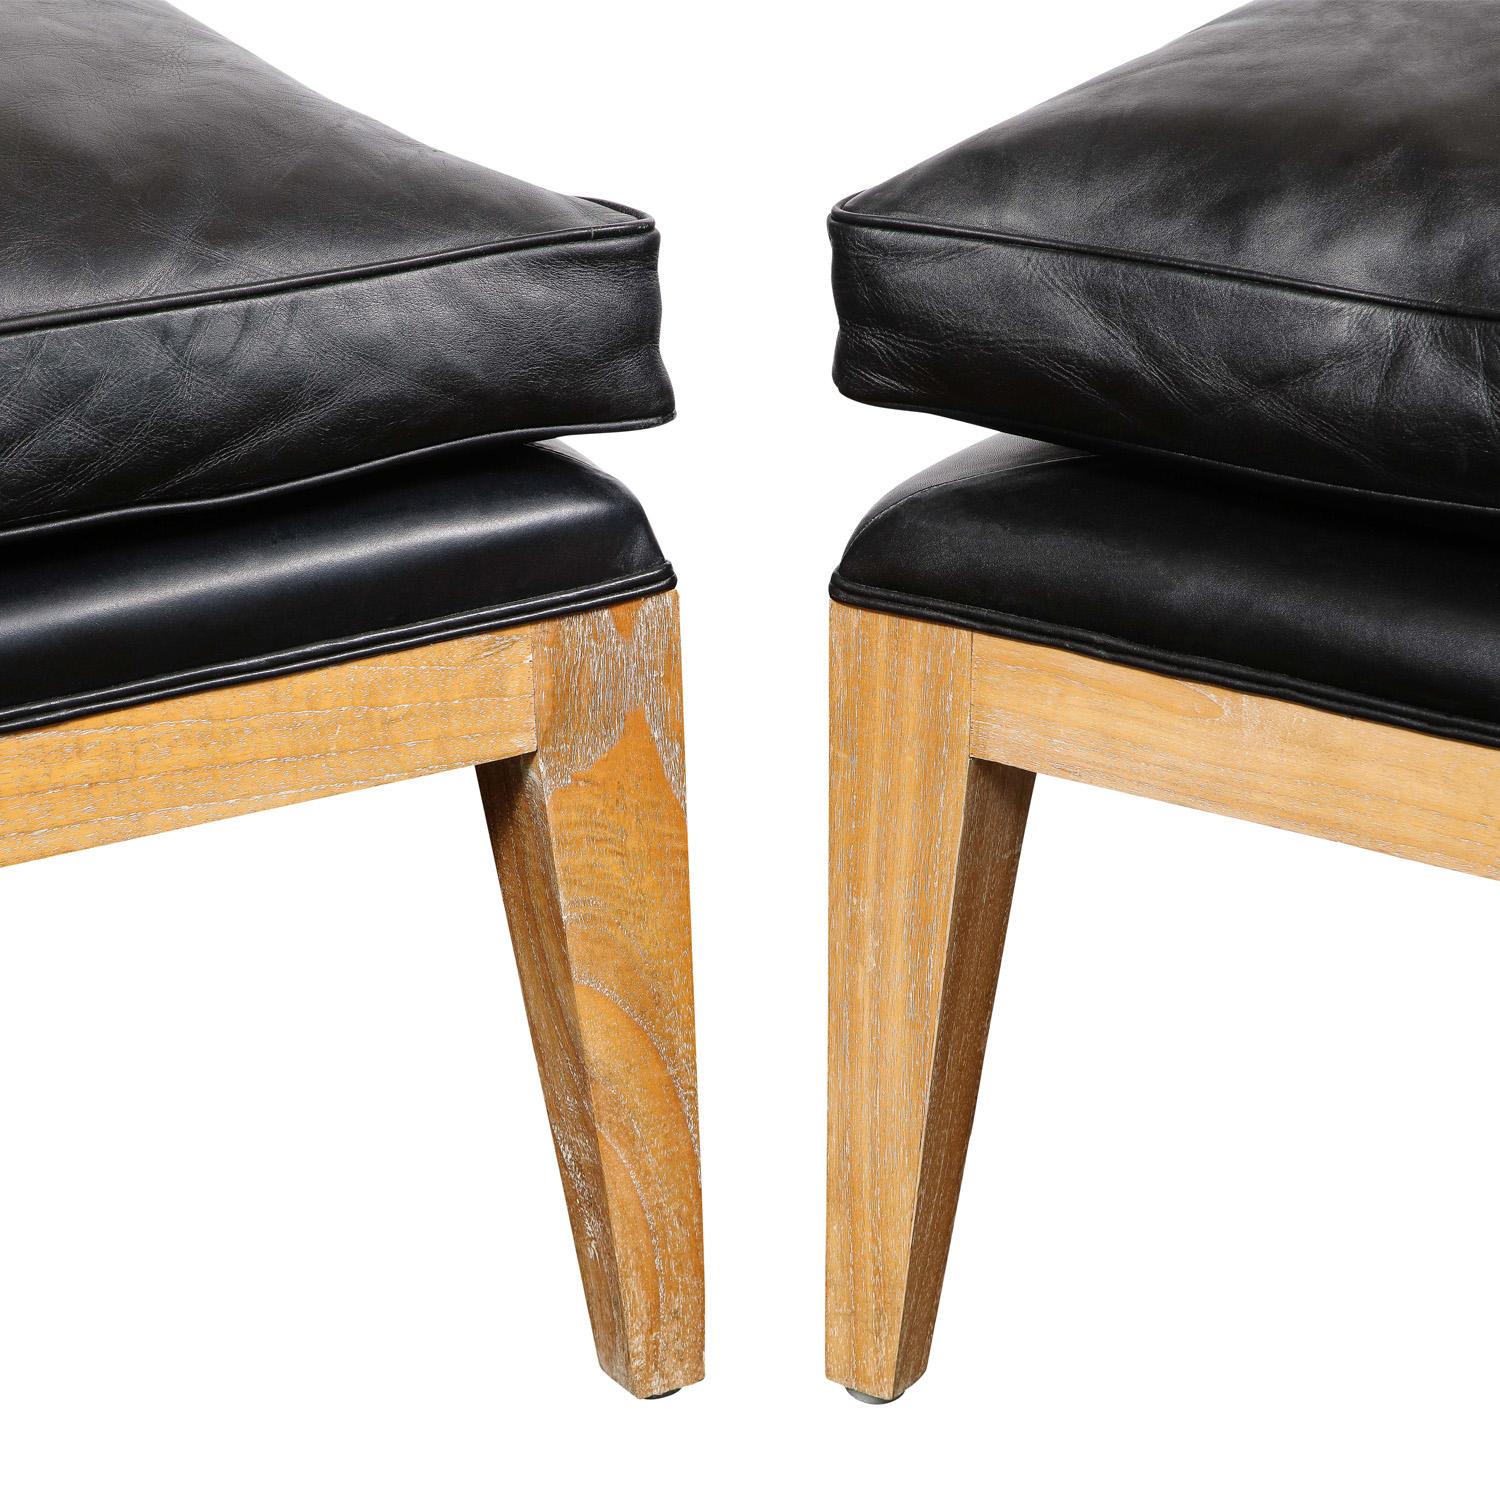 Hand-Crafted Chic French Pair of Cerused Oak Slipper Chairs with Black Leather 1960s